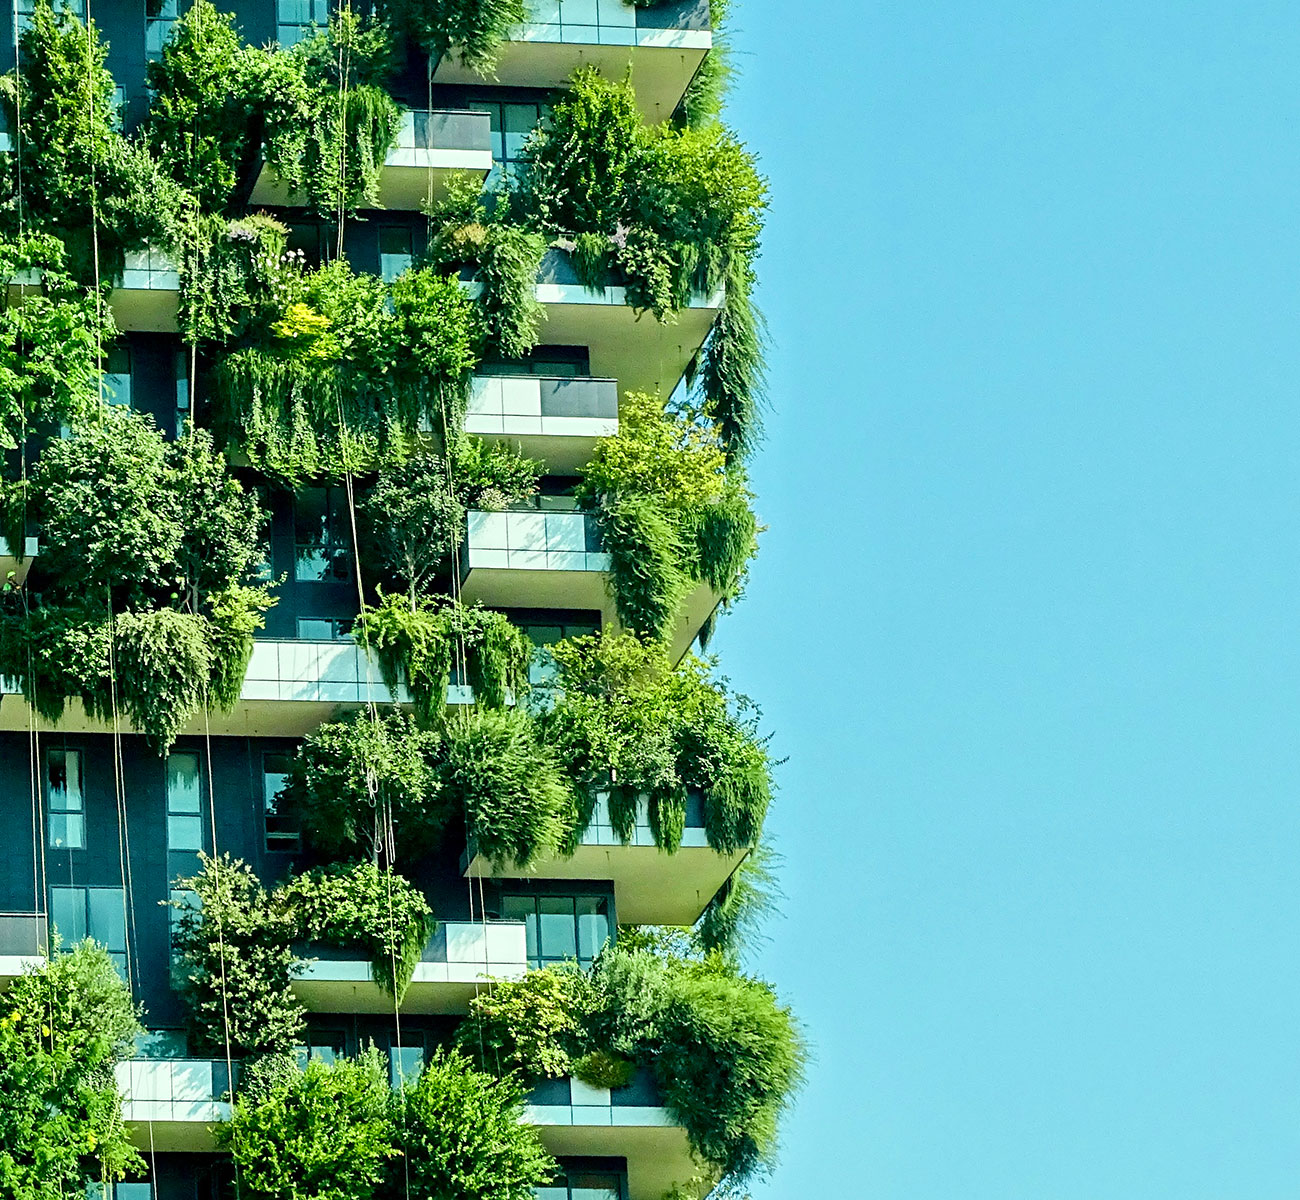 A high-rise residential building with lush foliage